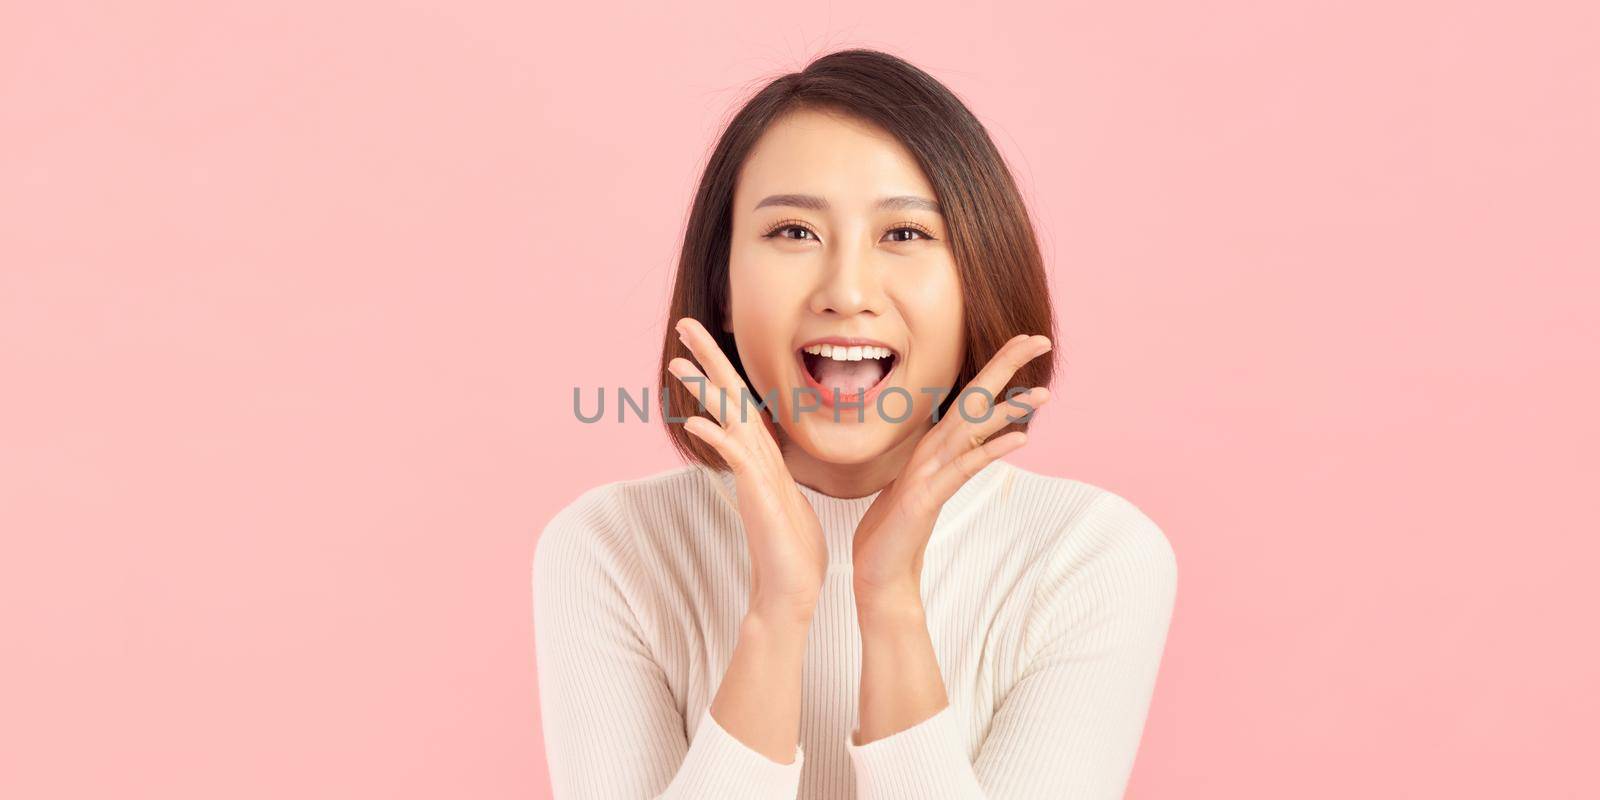 Scream and shout! Pretty young woman holding hands near opened mouth. Pink background. by makidotvn